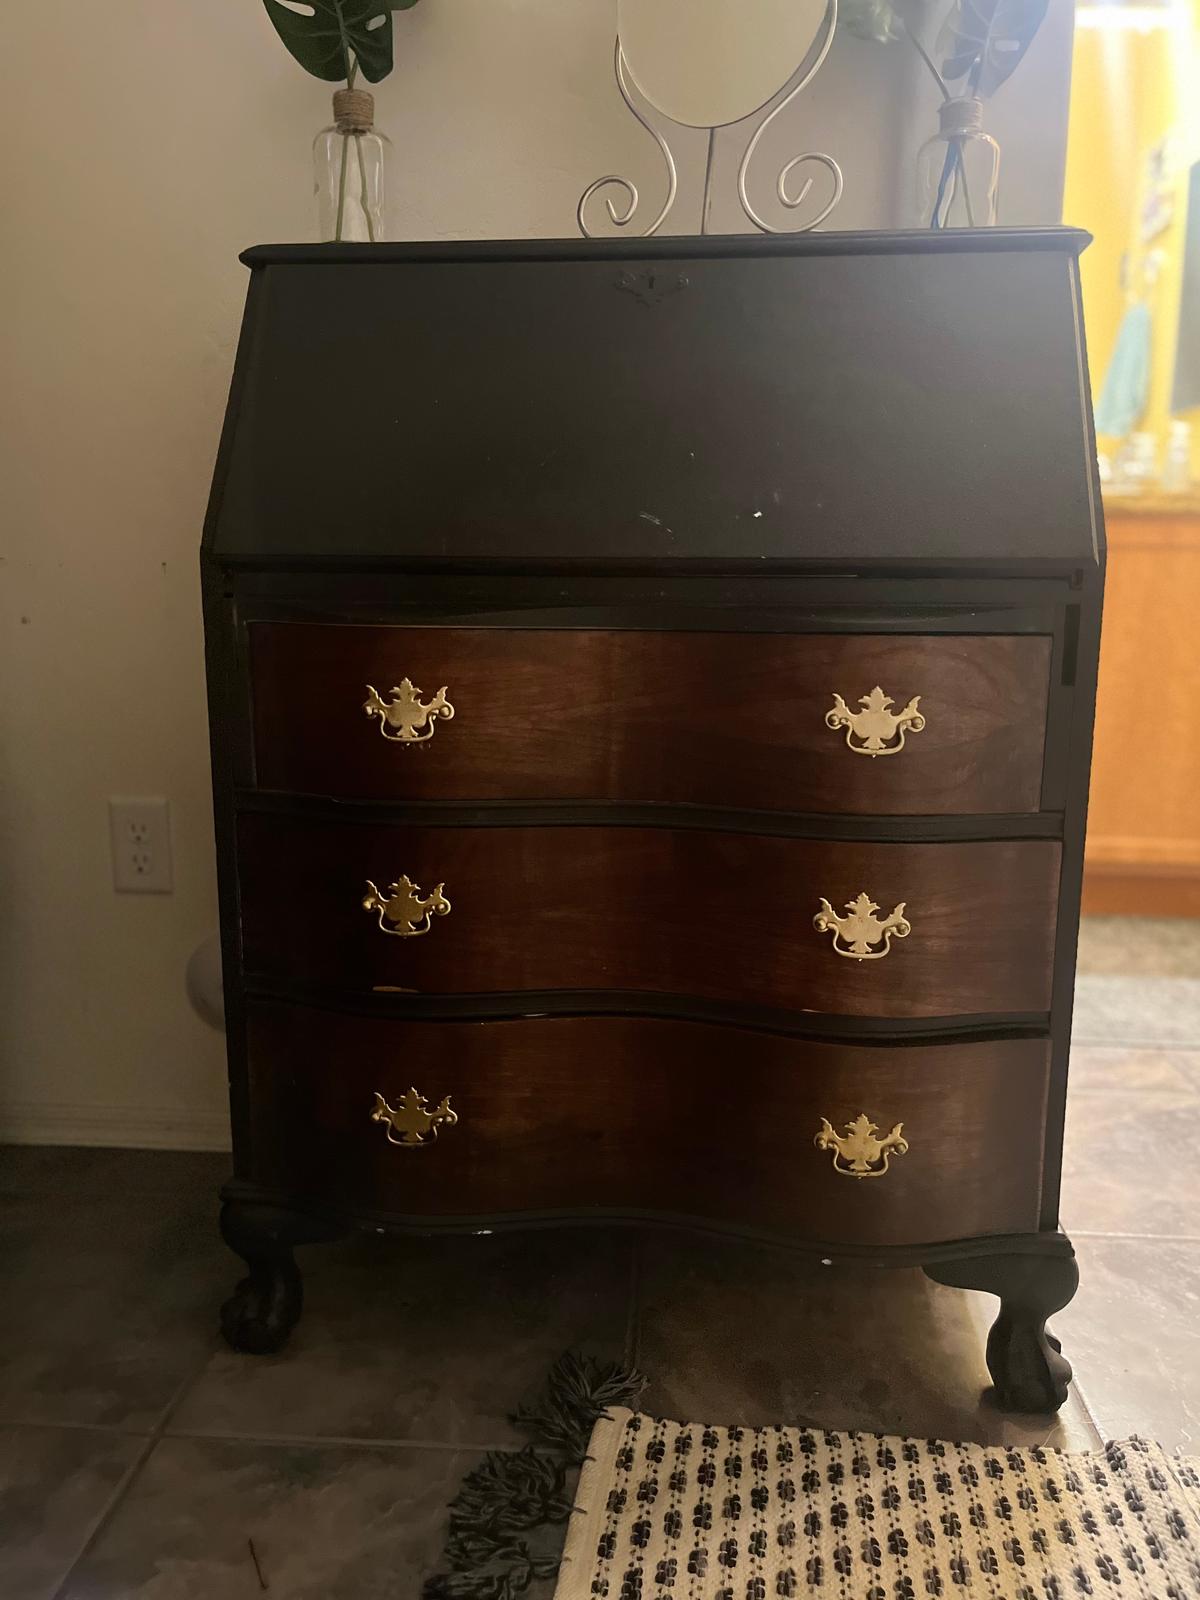 The secretary desk was bought at a Goodwill store. (Courtesy of Jenna Riggs)